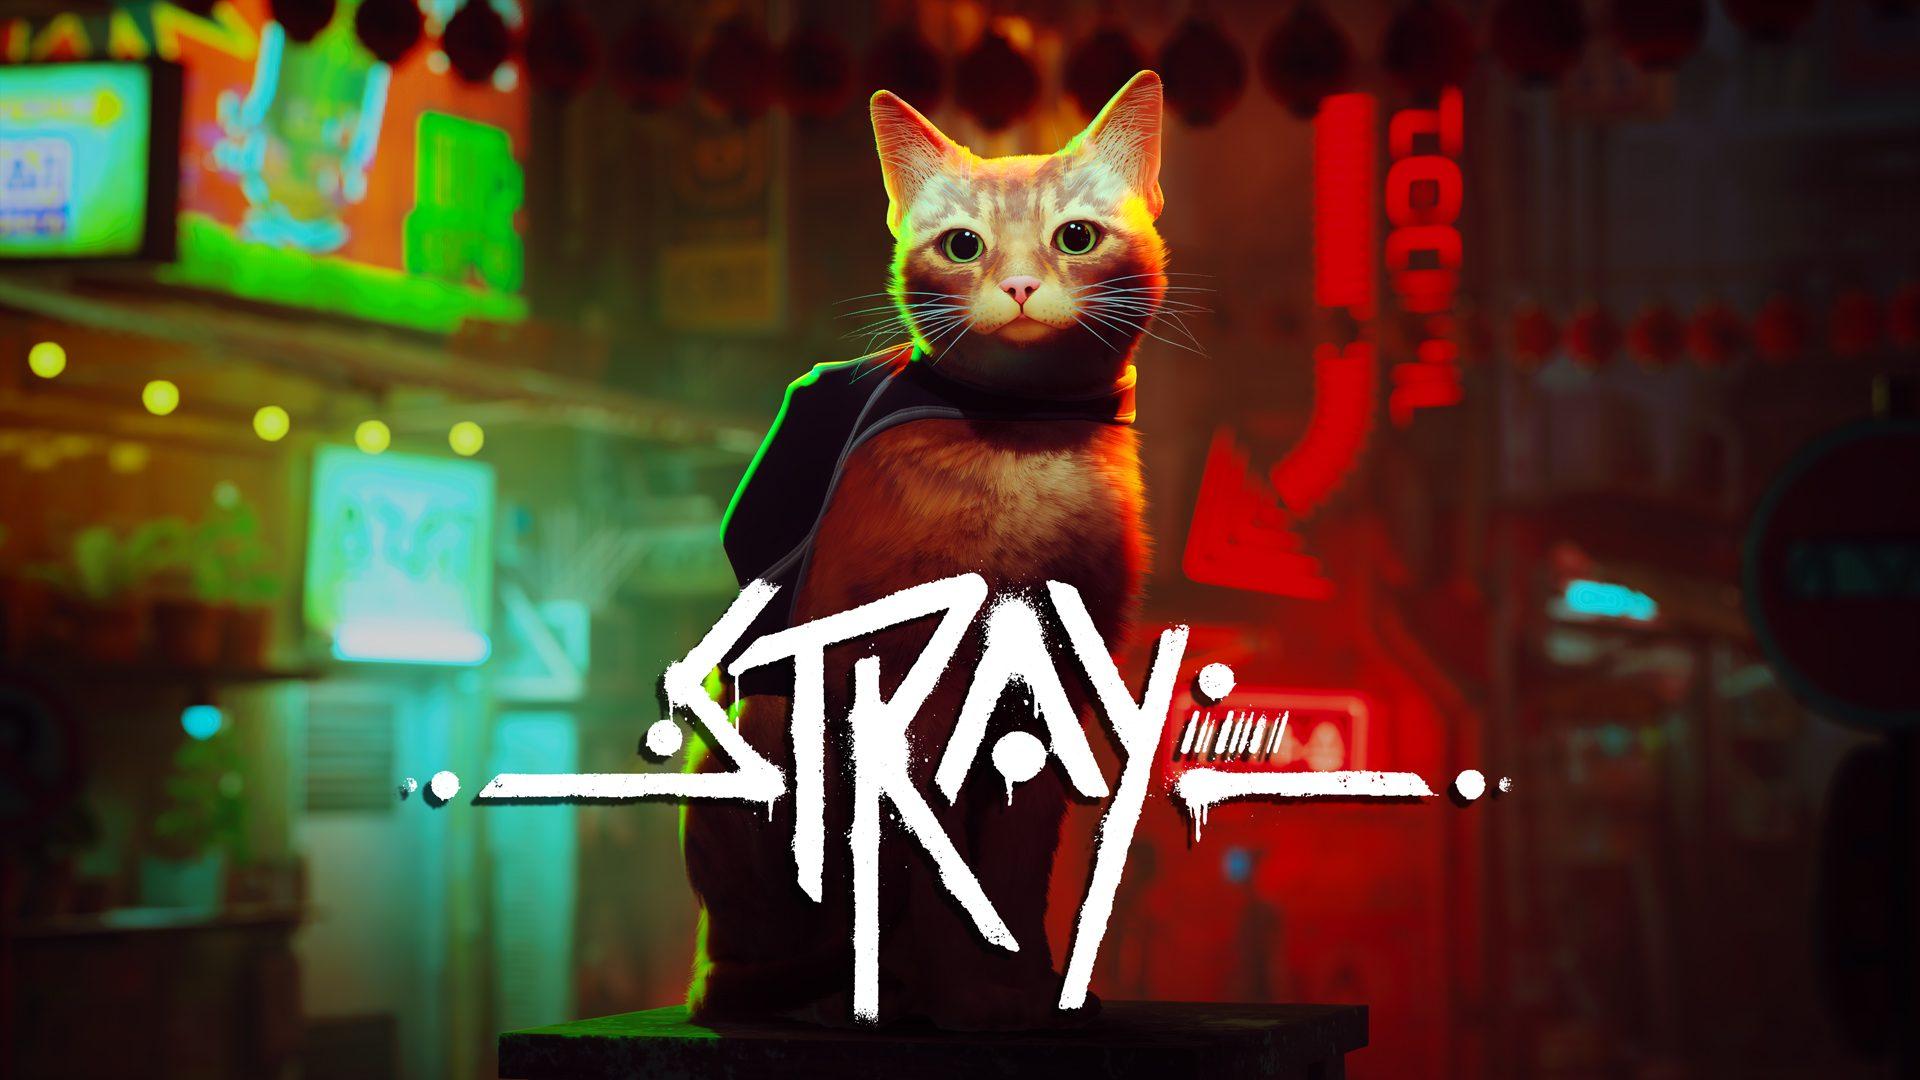 Stray Wallpapers  Top 25 Best Stray Cat Game Wallpapers  HQ 